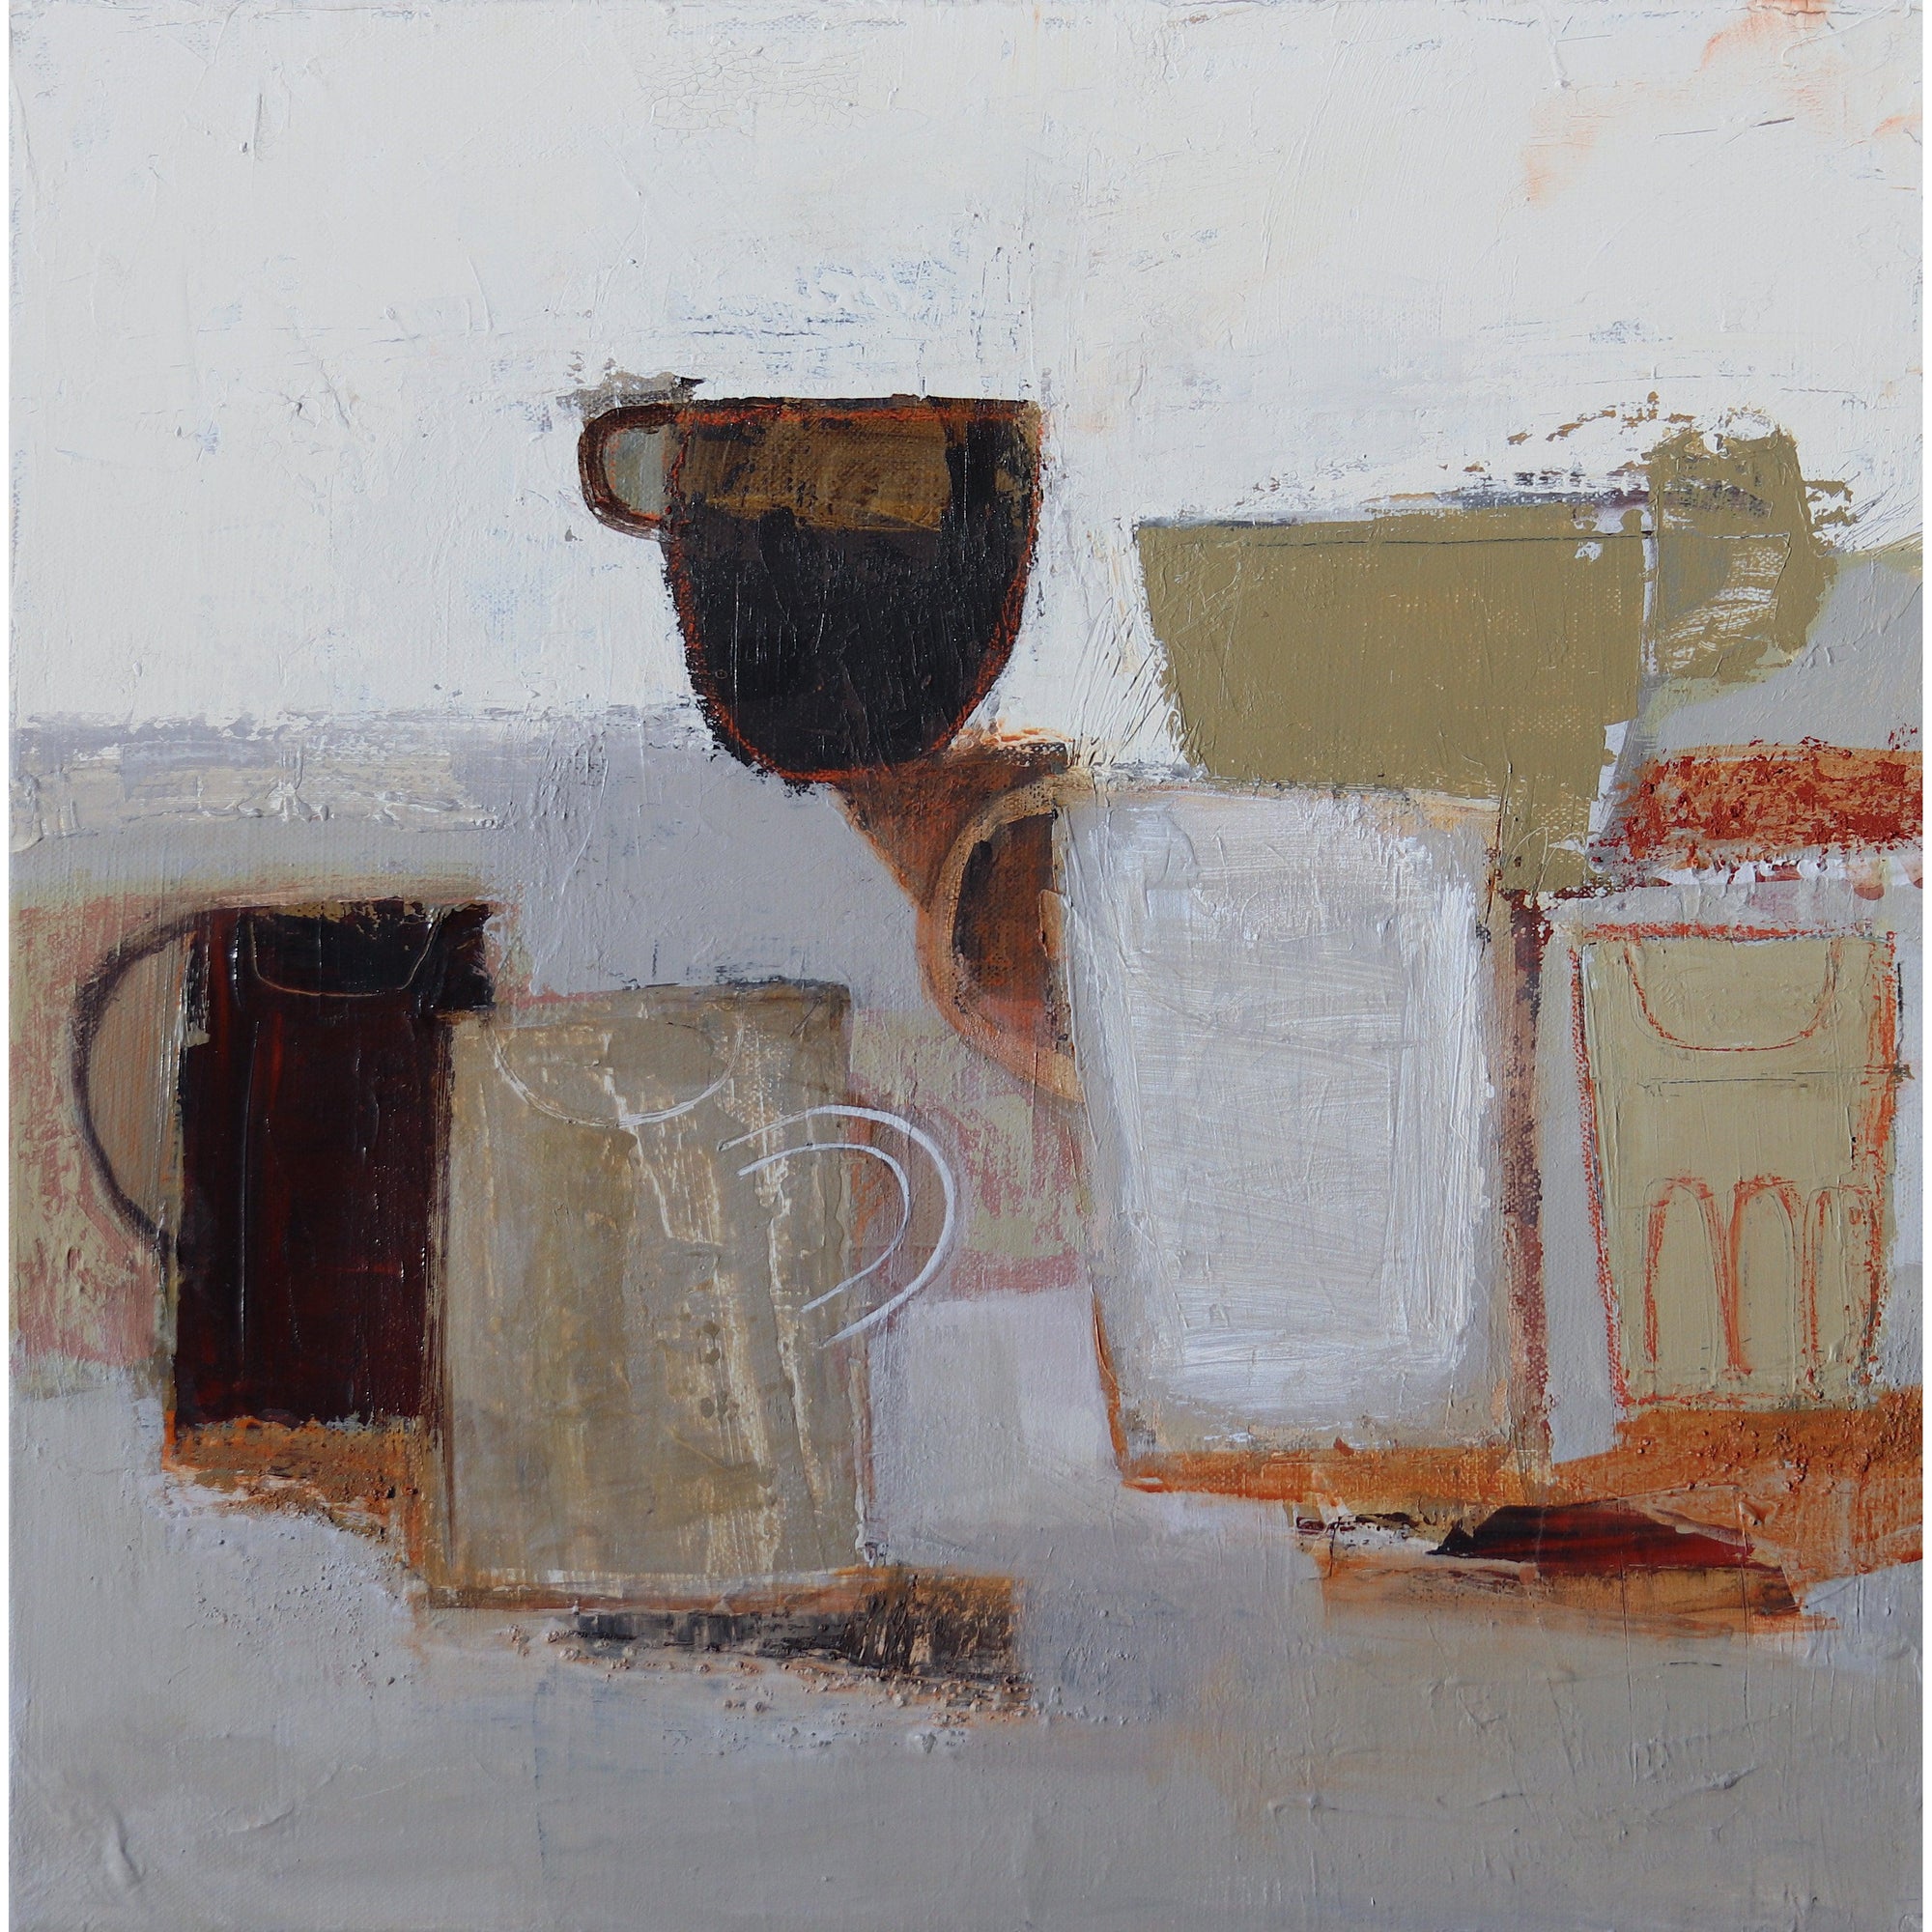 Cups and Shadows by Sonia Barton available at Padstow Gallery, Cornwall